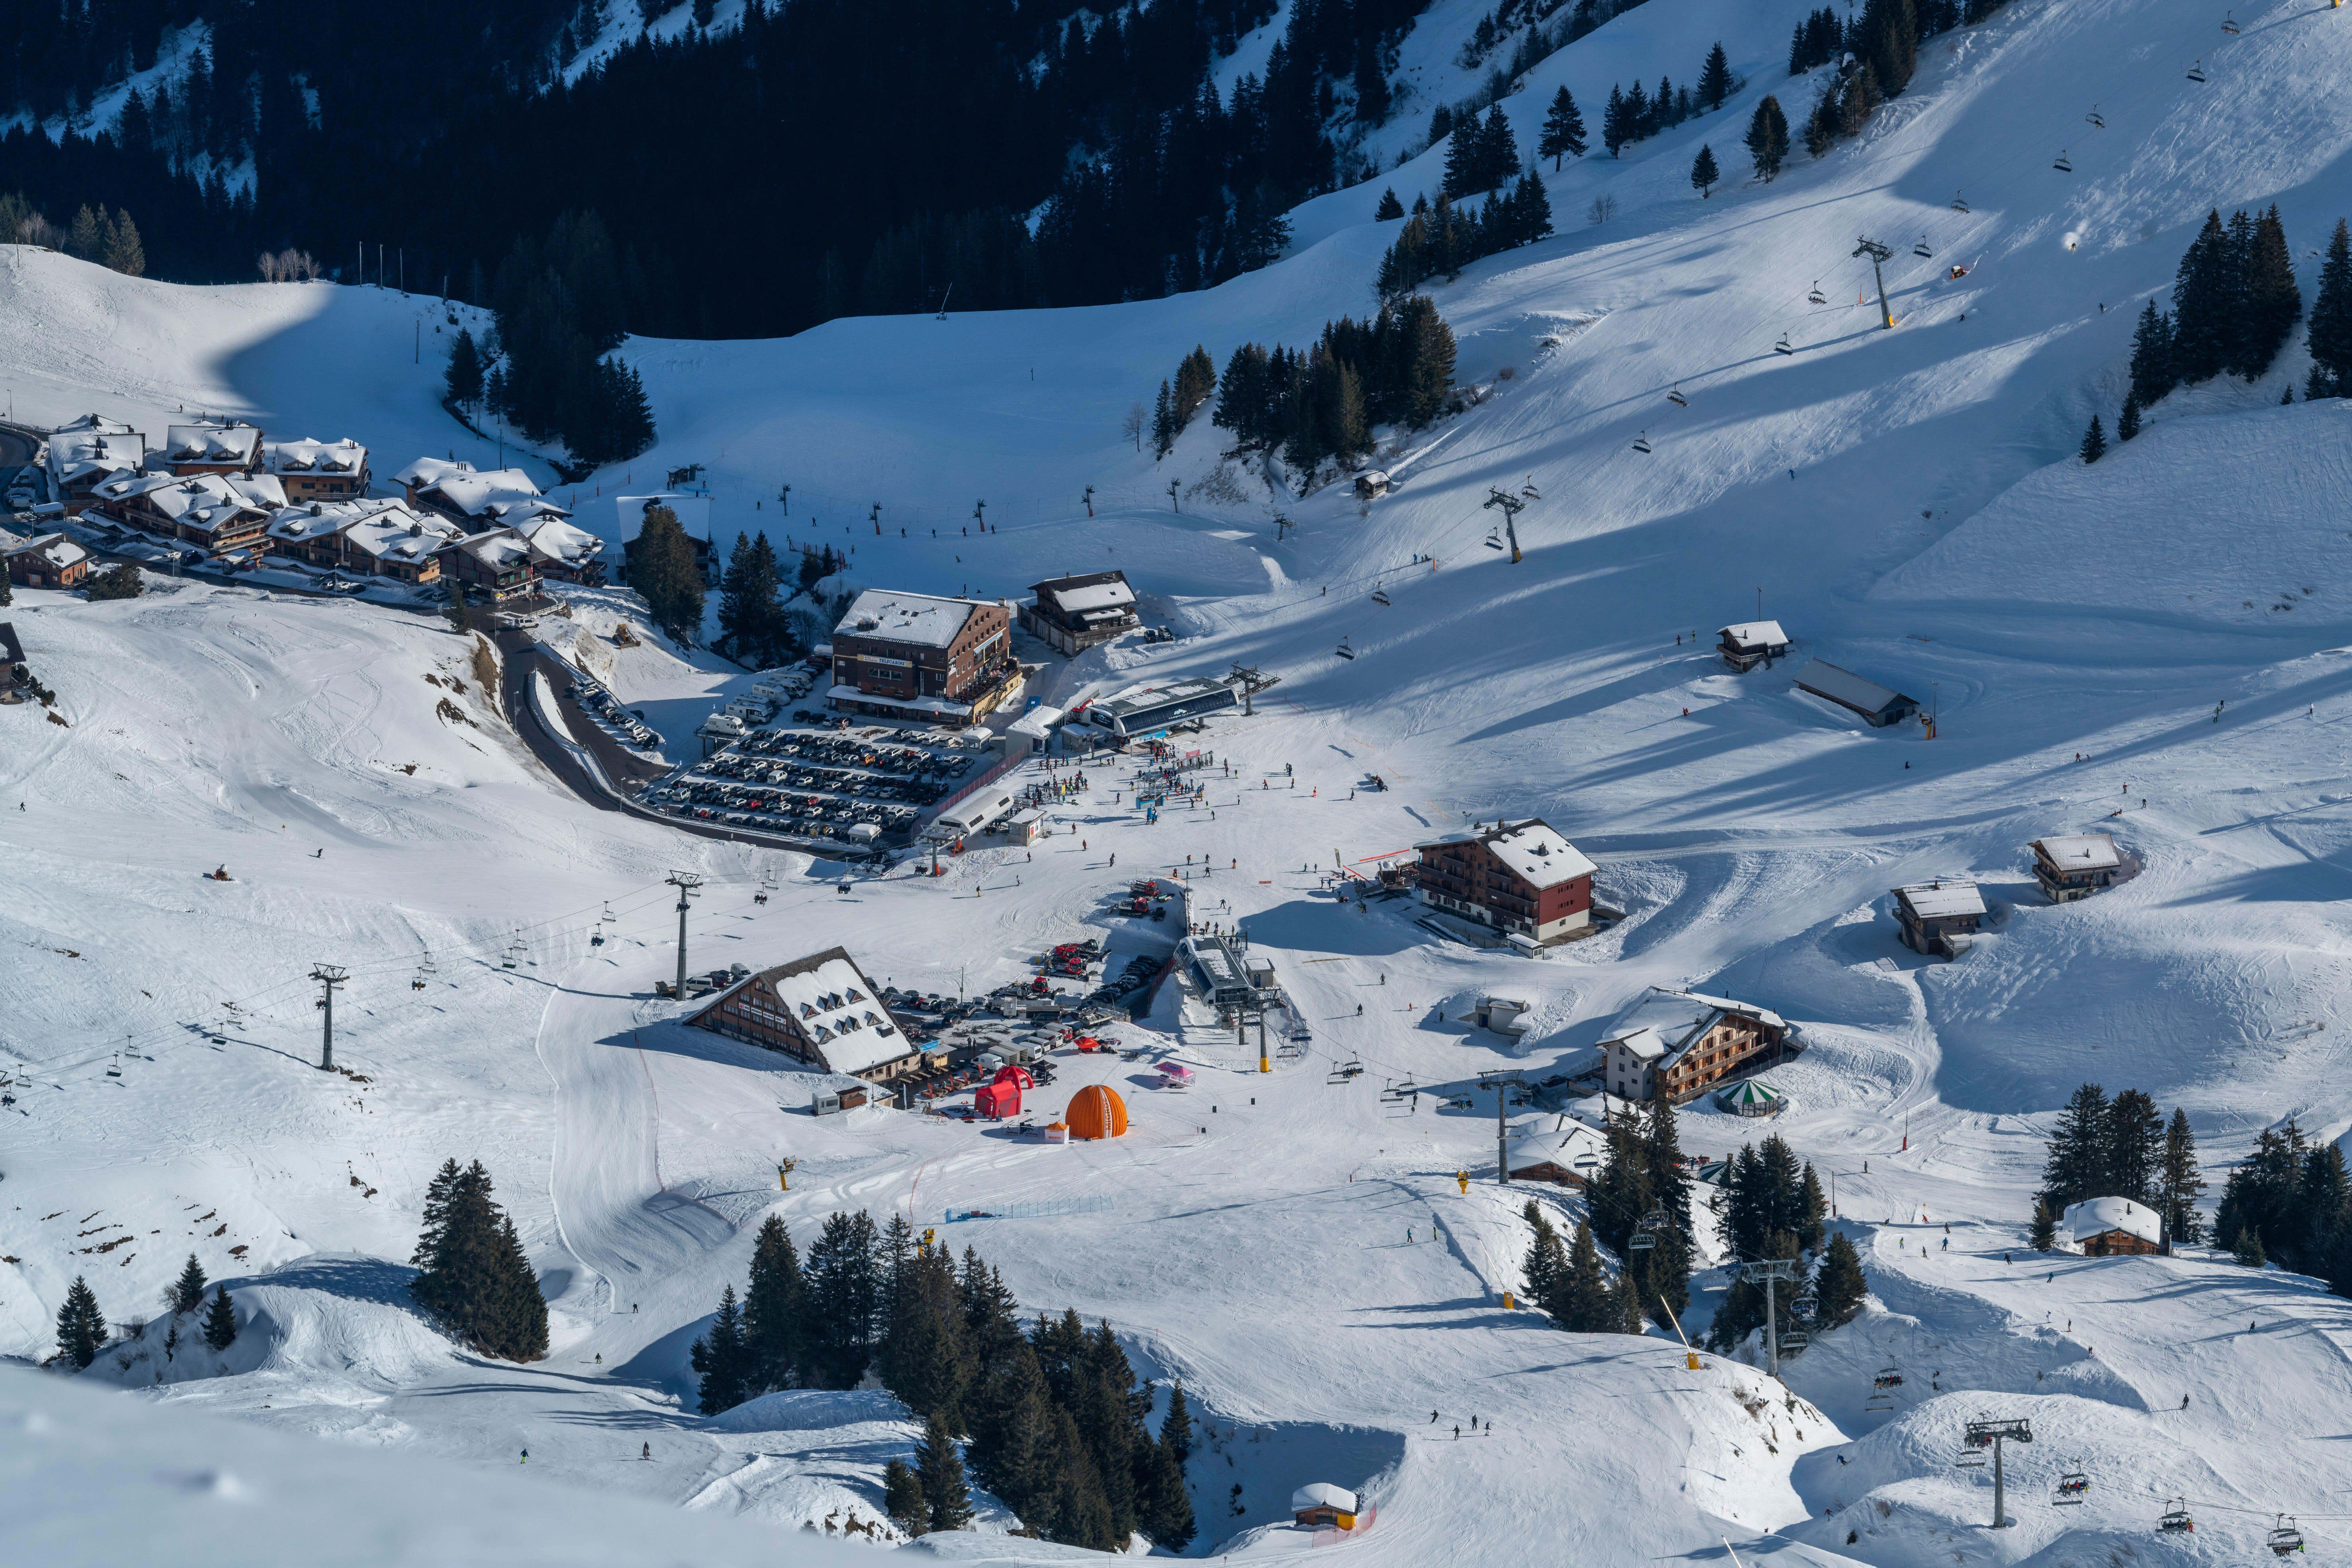 A British man has been killed in a skiing accident in the resort of Avoriaz in France (Matthew Williams-Ellis Travel Photography/Alamy/PA)